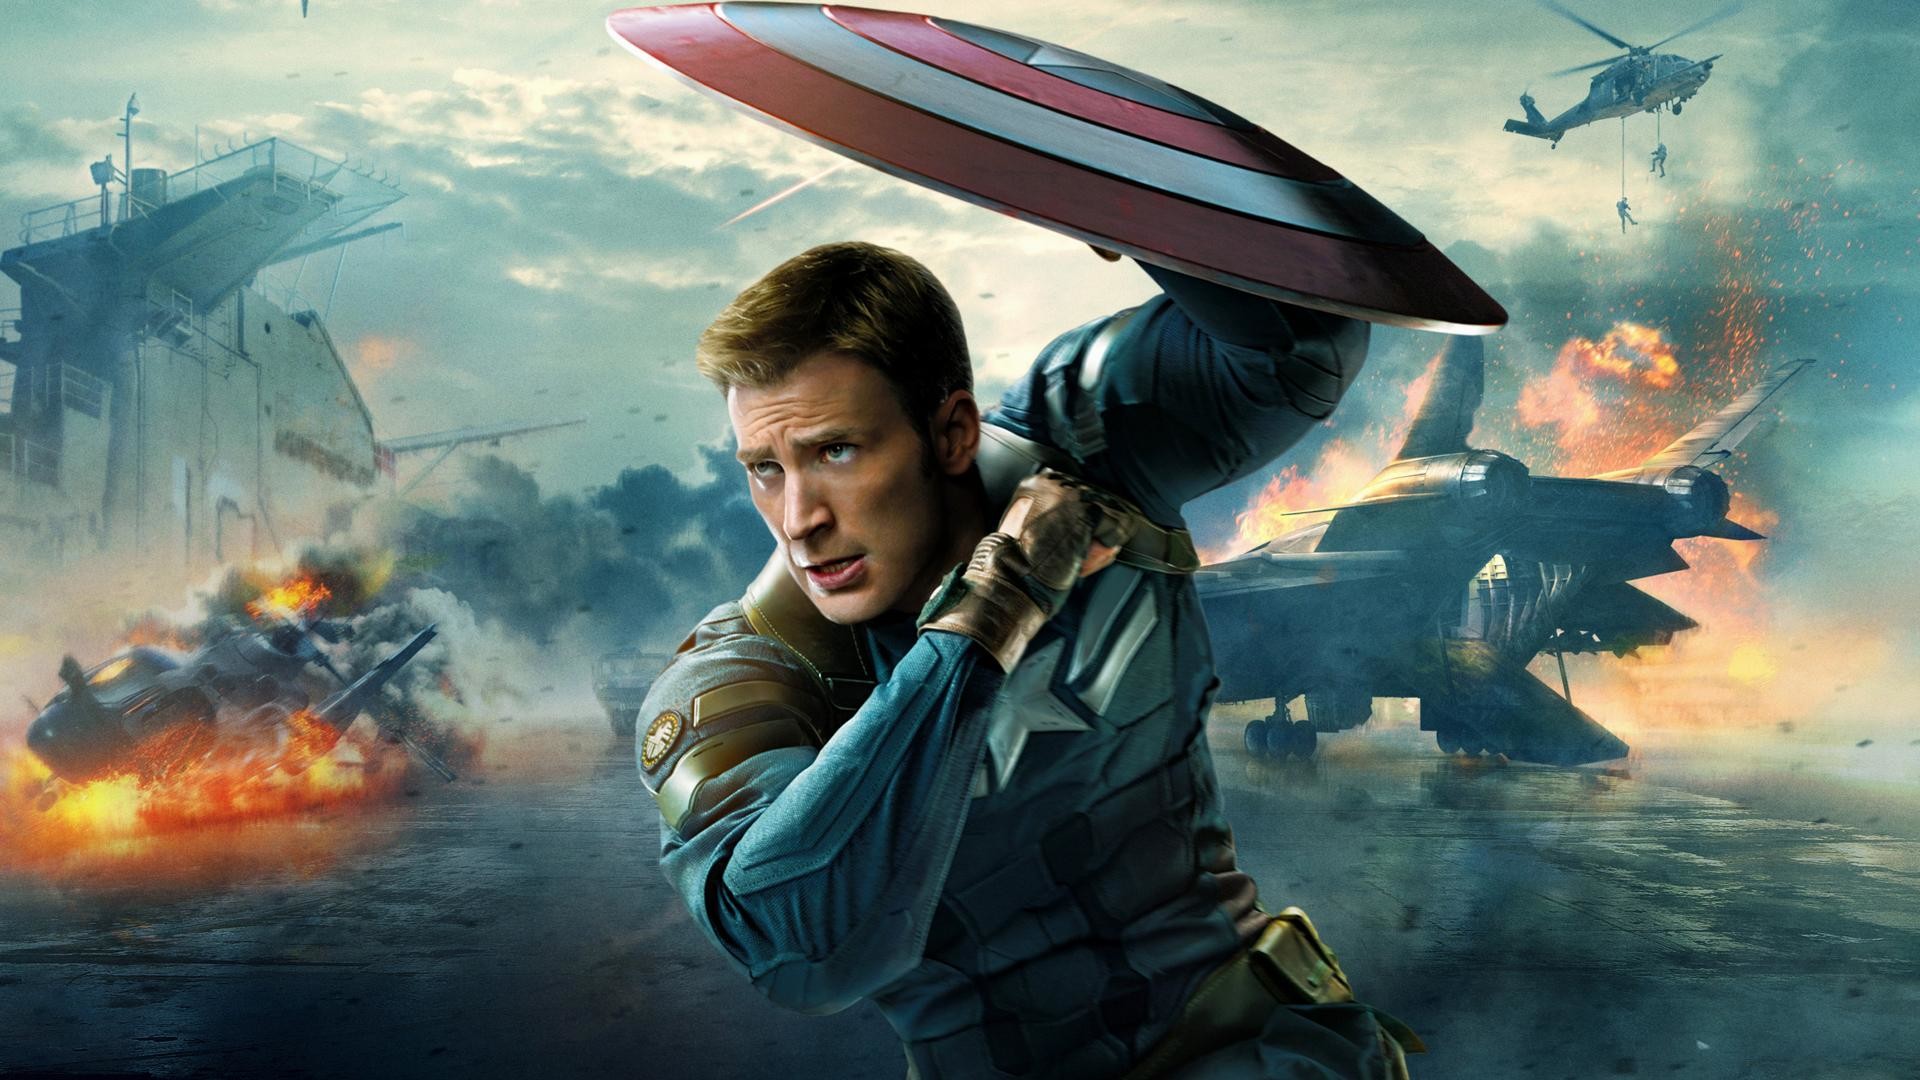 1920x1080 wallpaper.wiki-Movies-Free-Captain-America-Images-PIC-